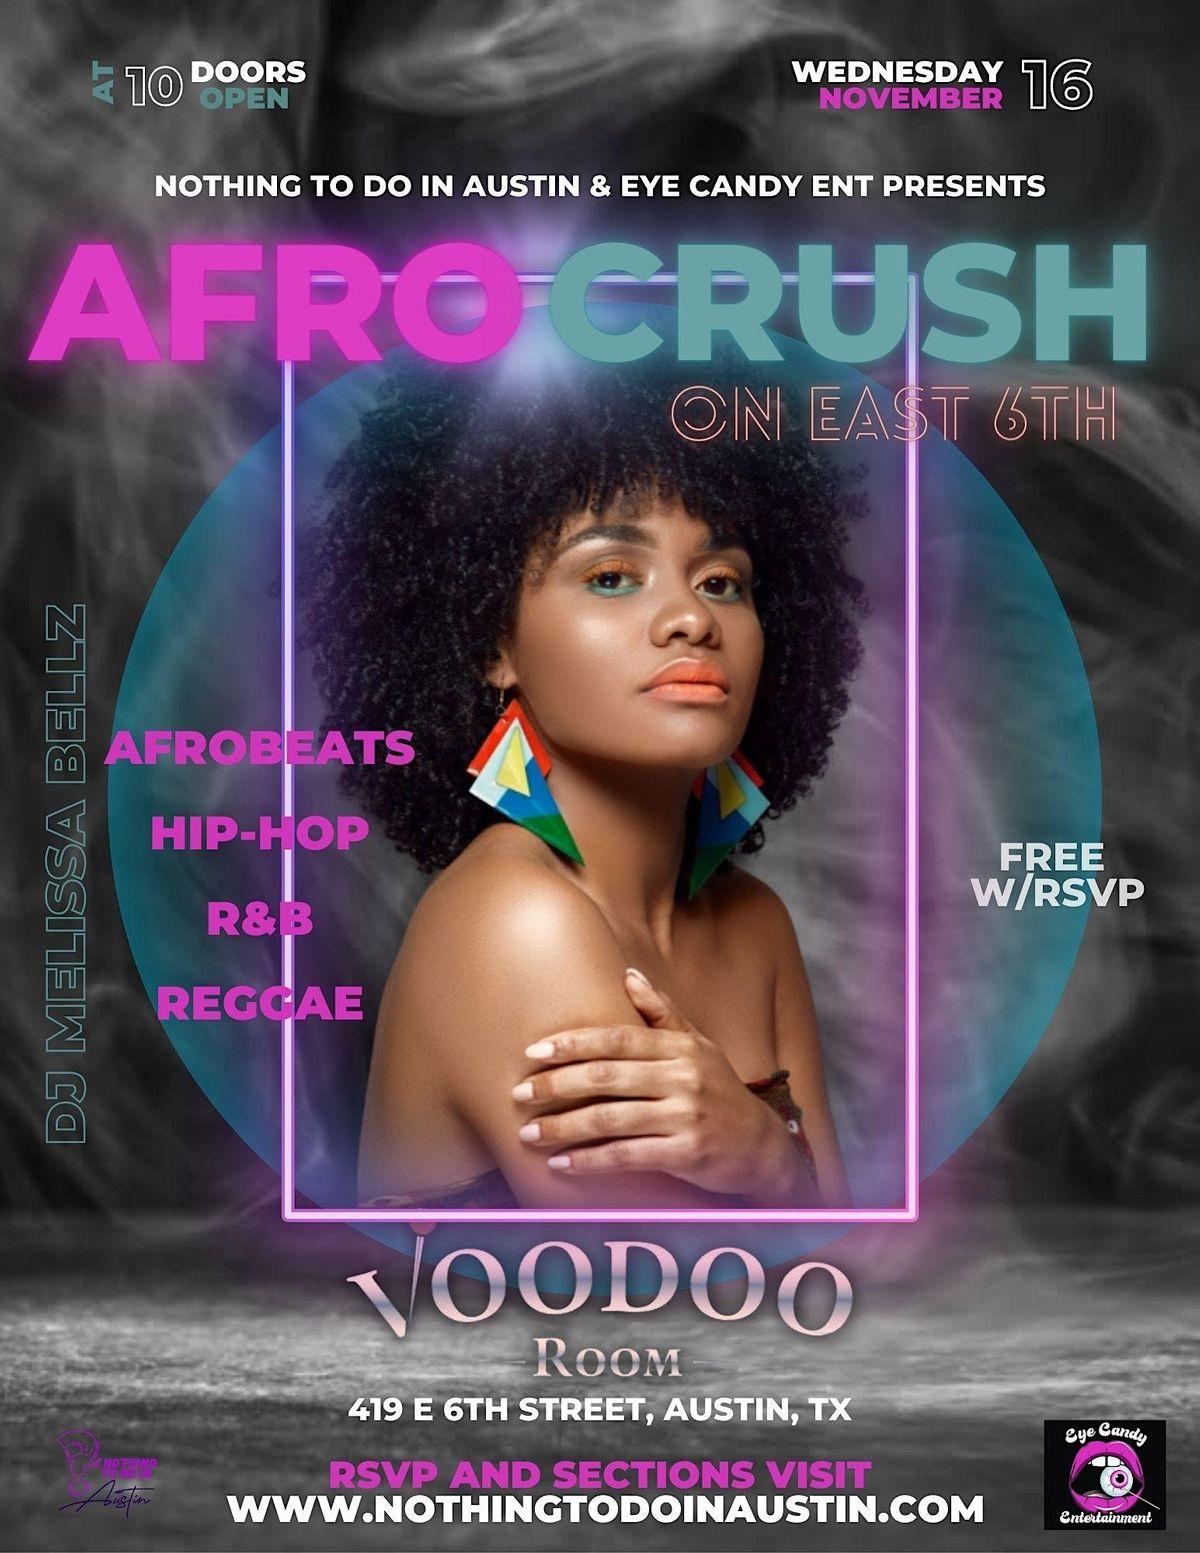 AfroCrush on East 6th